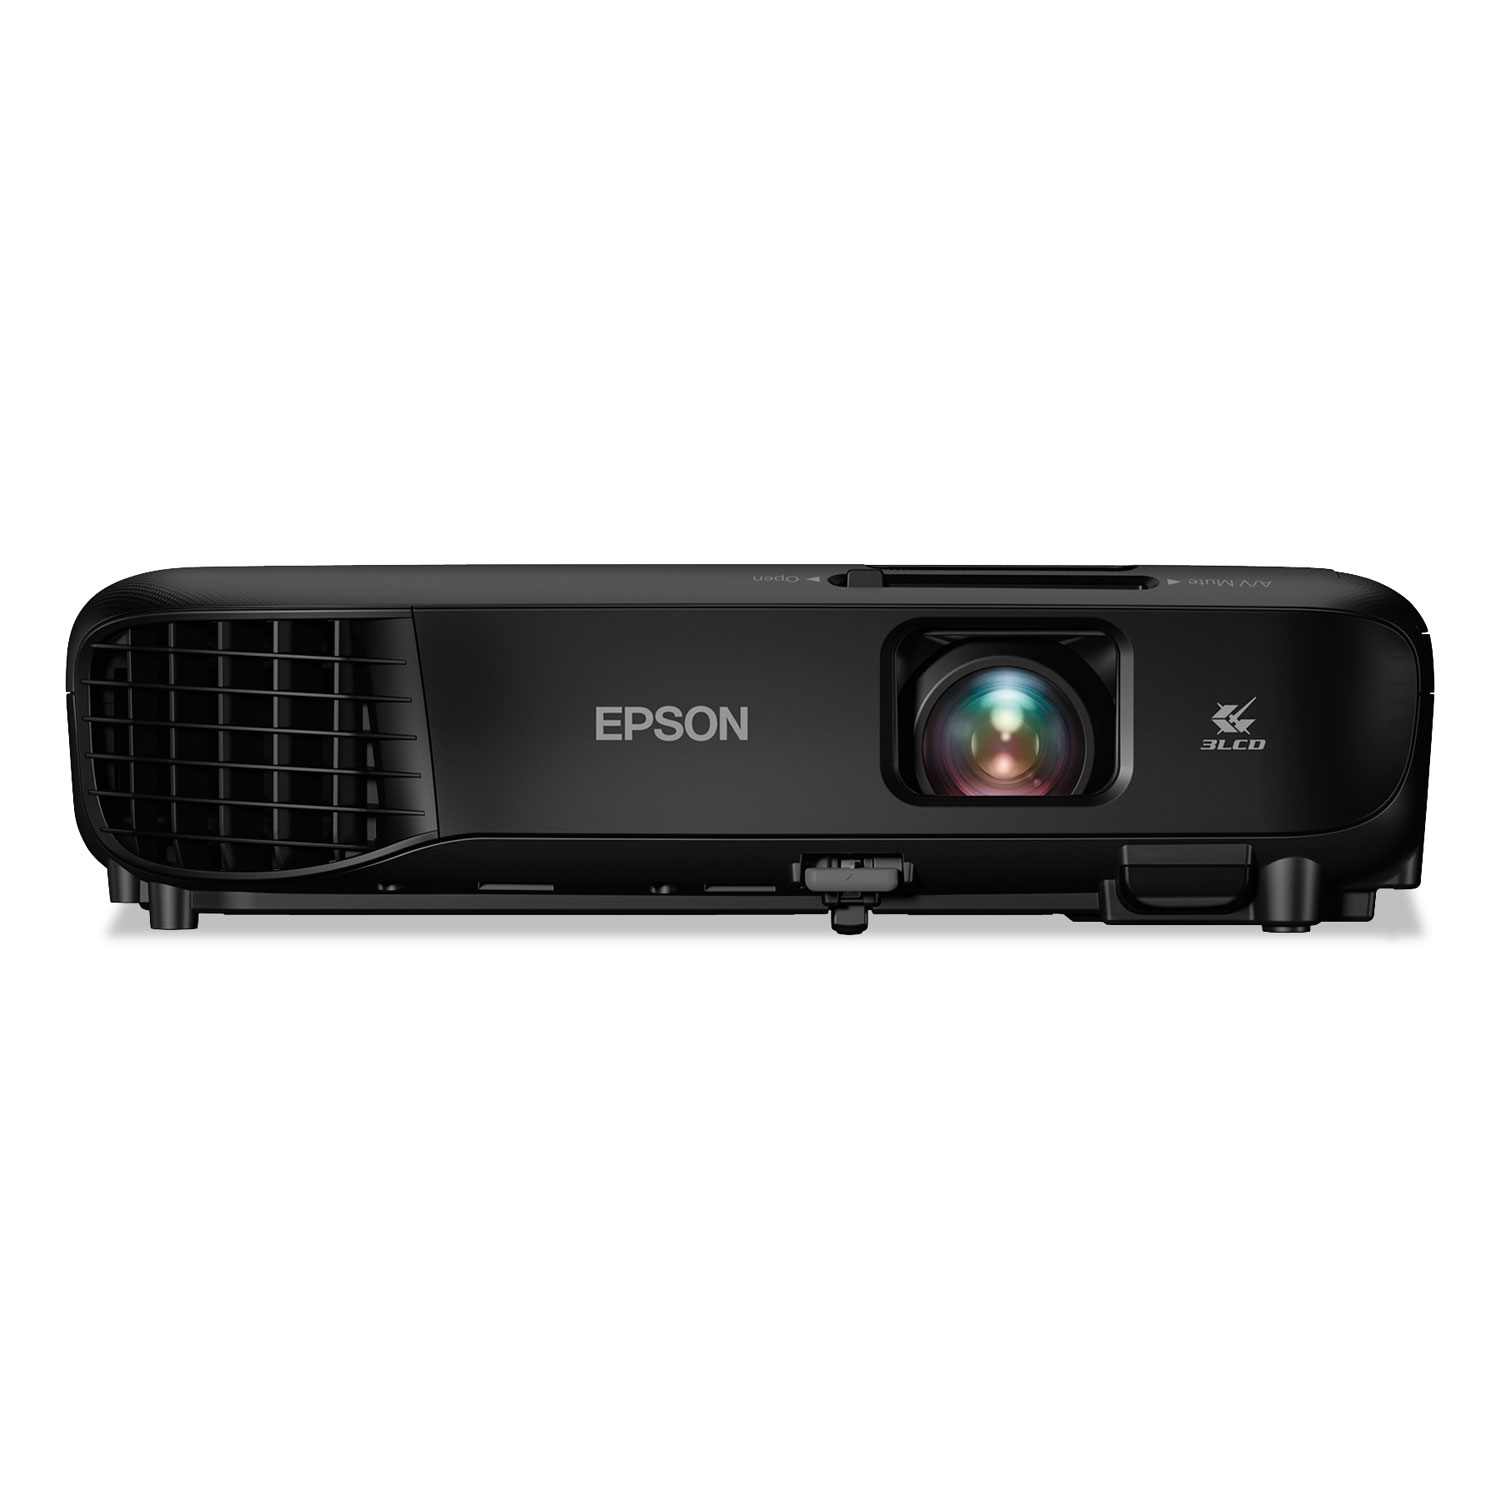  Epson V11H845120 PowerLite 1266 Wireless 3LCD Projector, 3600 lm, 1280 x 800 Pixels, 1.2x Zoom (EPSV11H845120) 